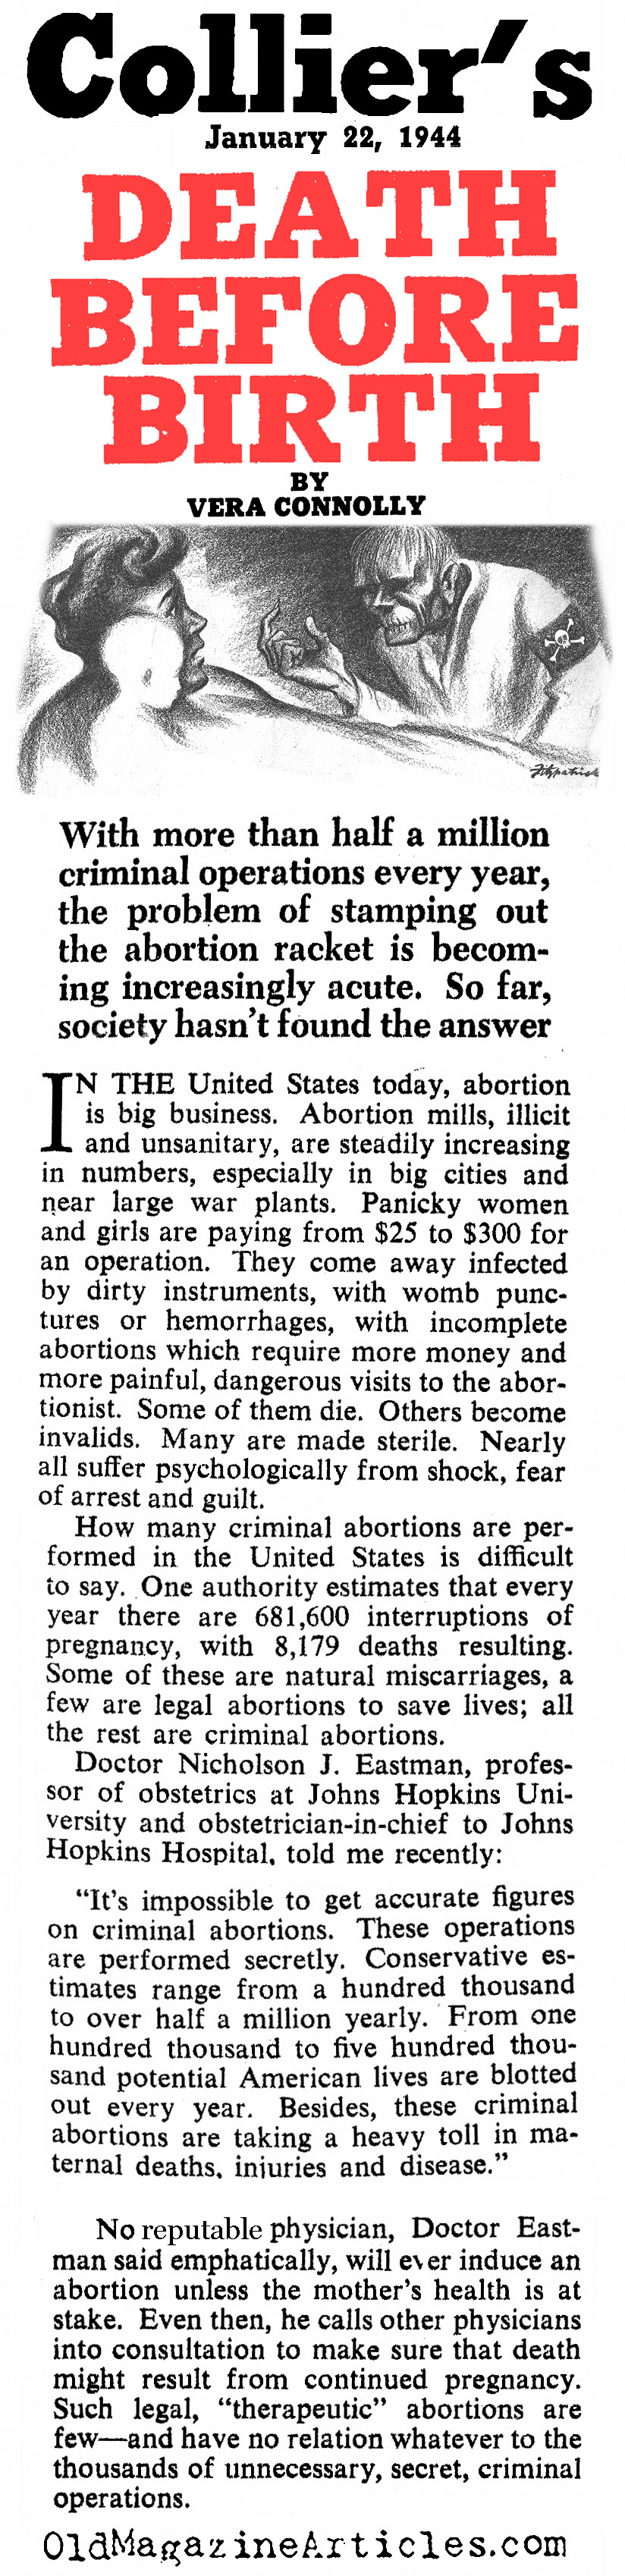 The Growing Popularity of Abortions (Collier's Magazine, 1944)